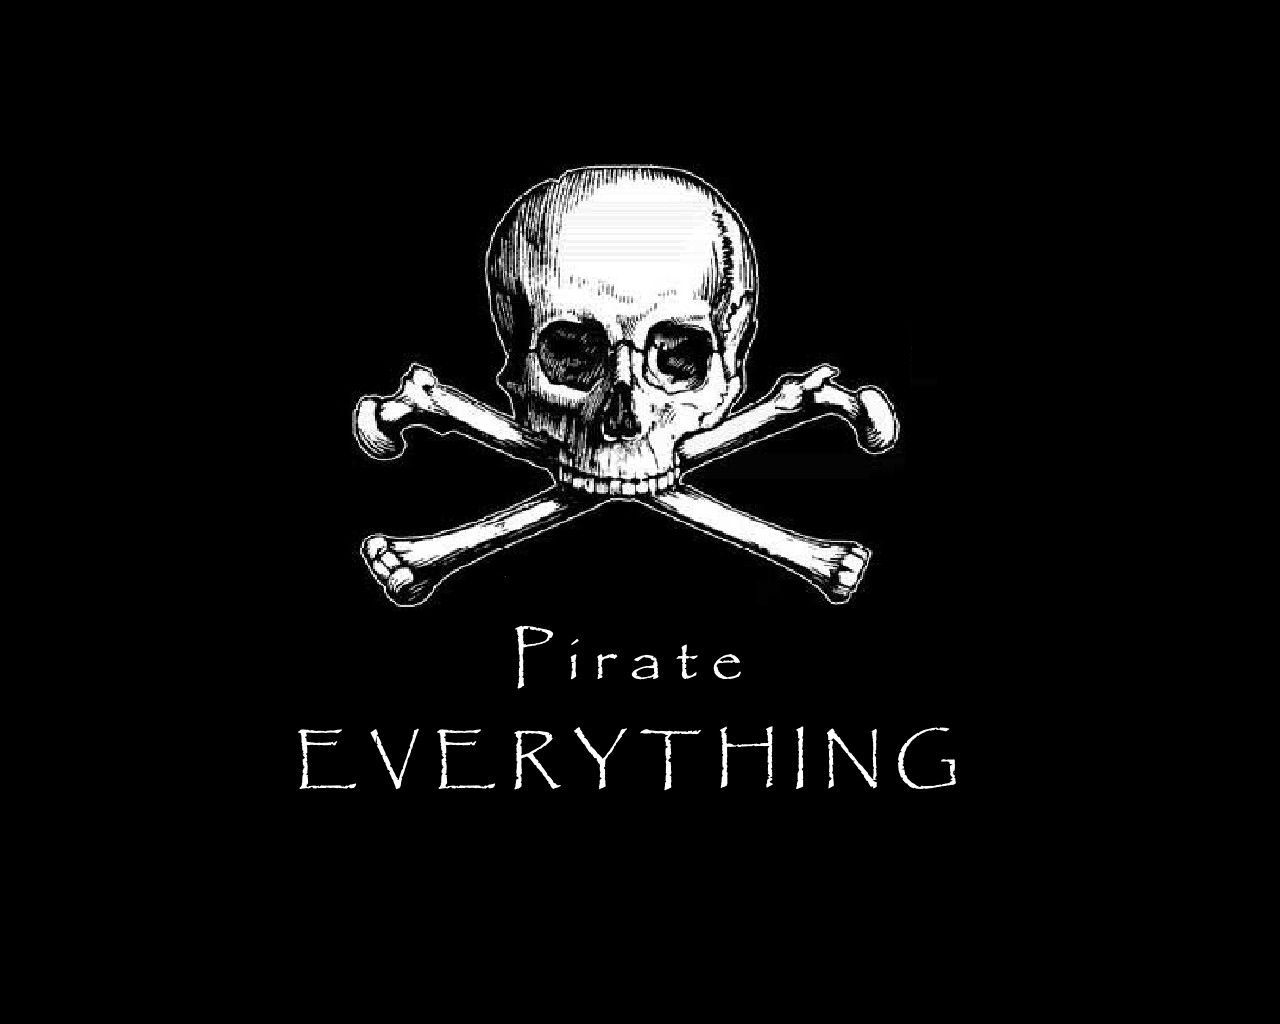 Pirate Everything Wallpaper | 1280x1024 | ID:16560